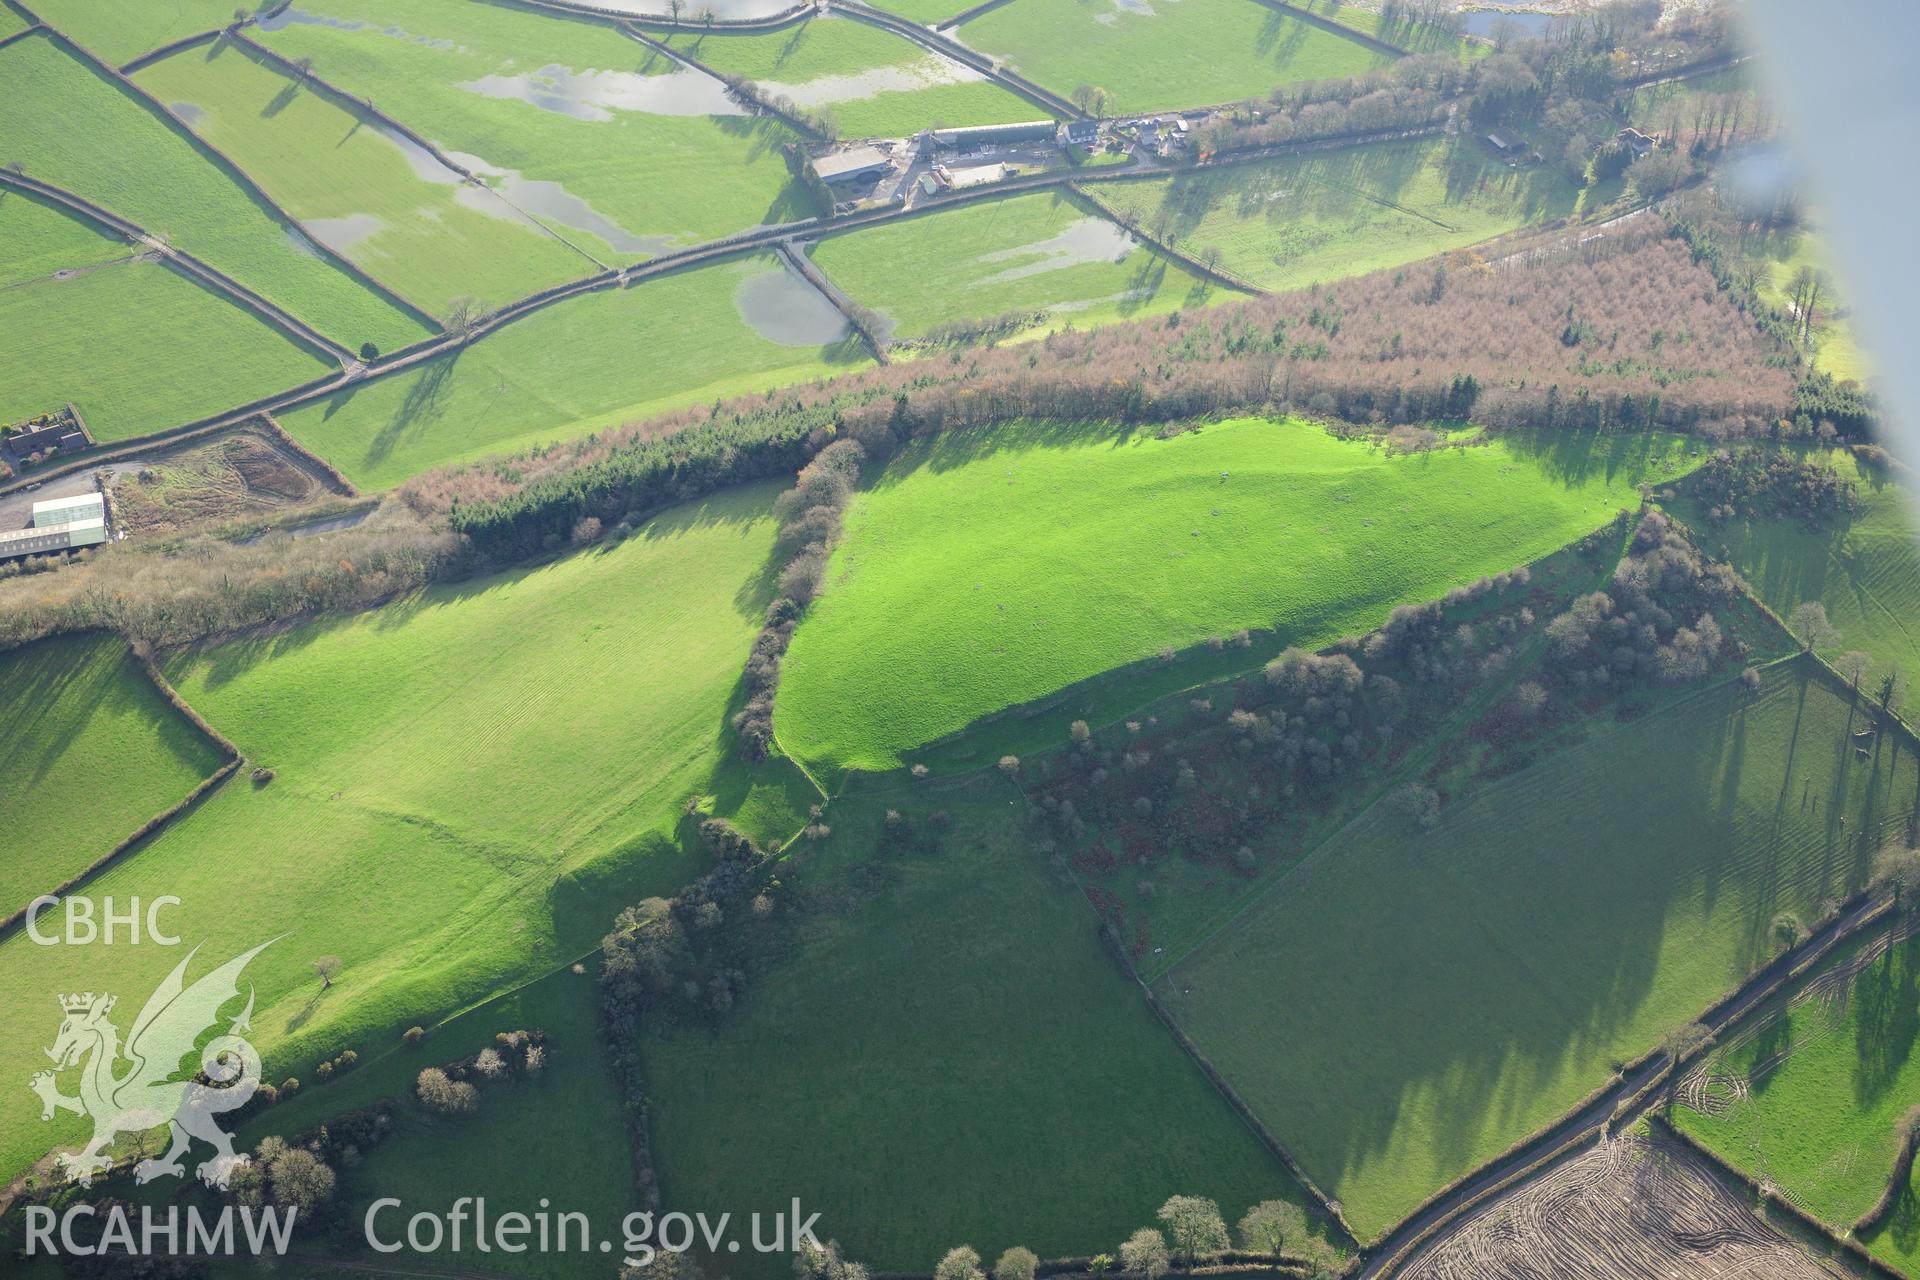 RCAHMW colour oblique photograph of Merlins Hill hillfort. Taken by Toby Driver on 28/11/2012.